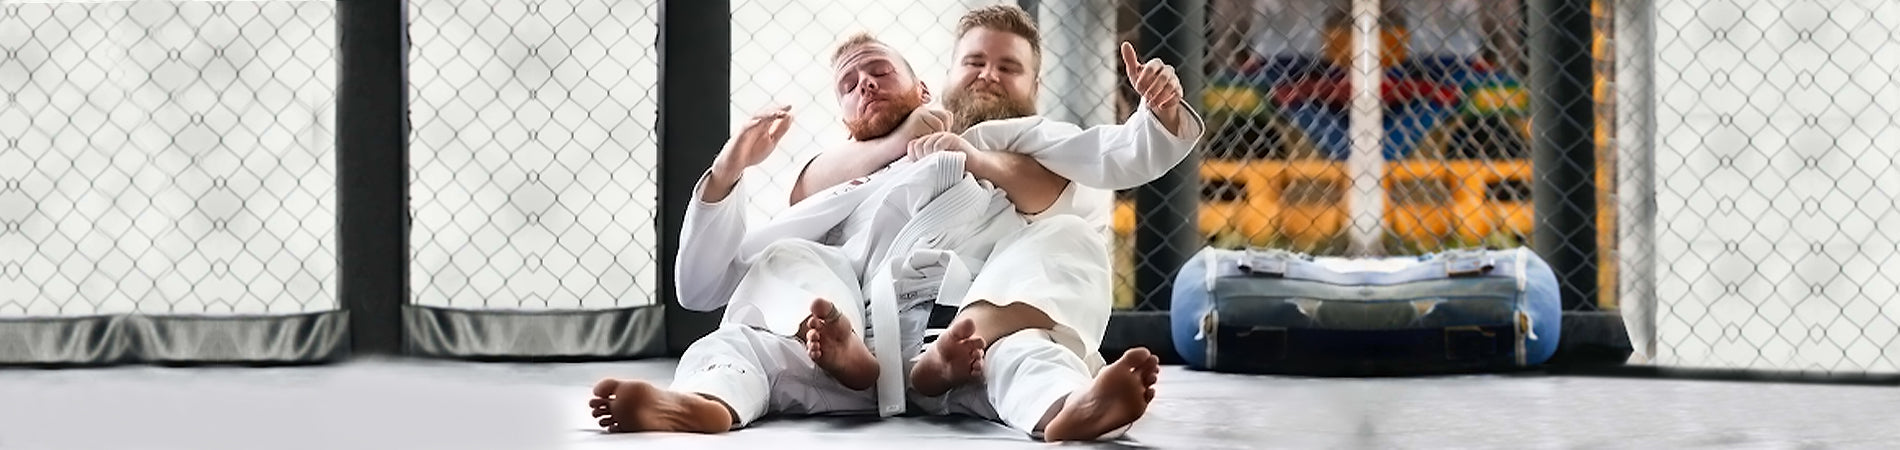 Is BJJ Good for Big Guys?